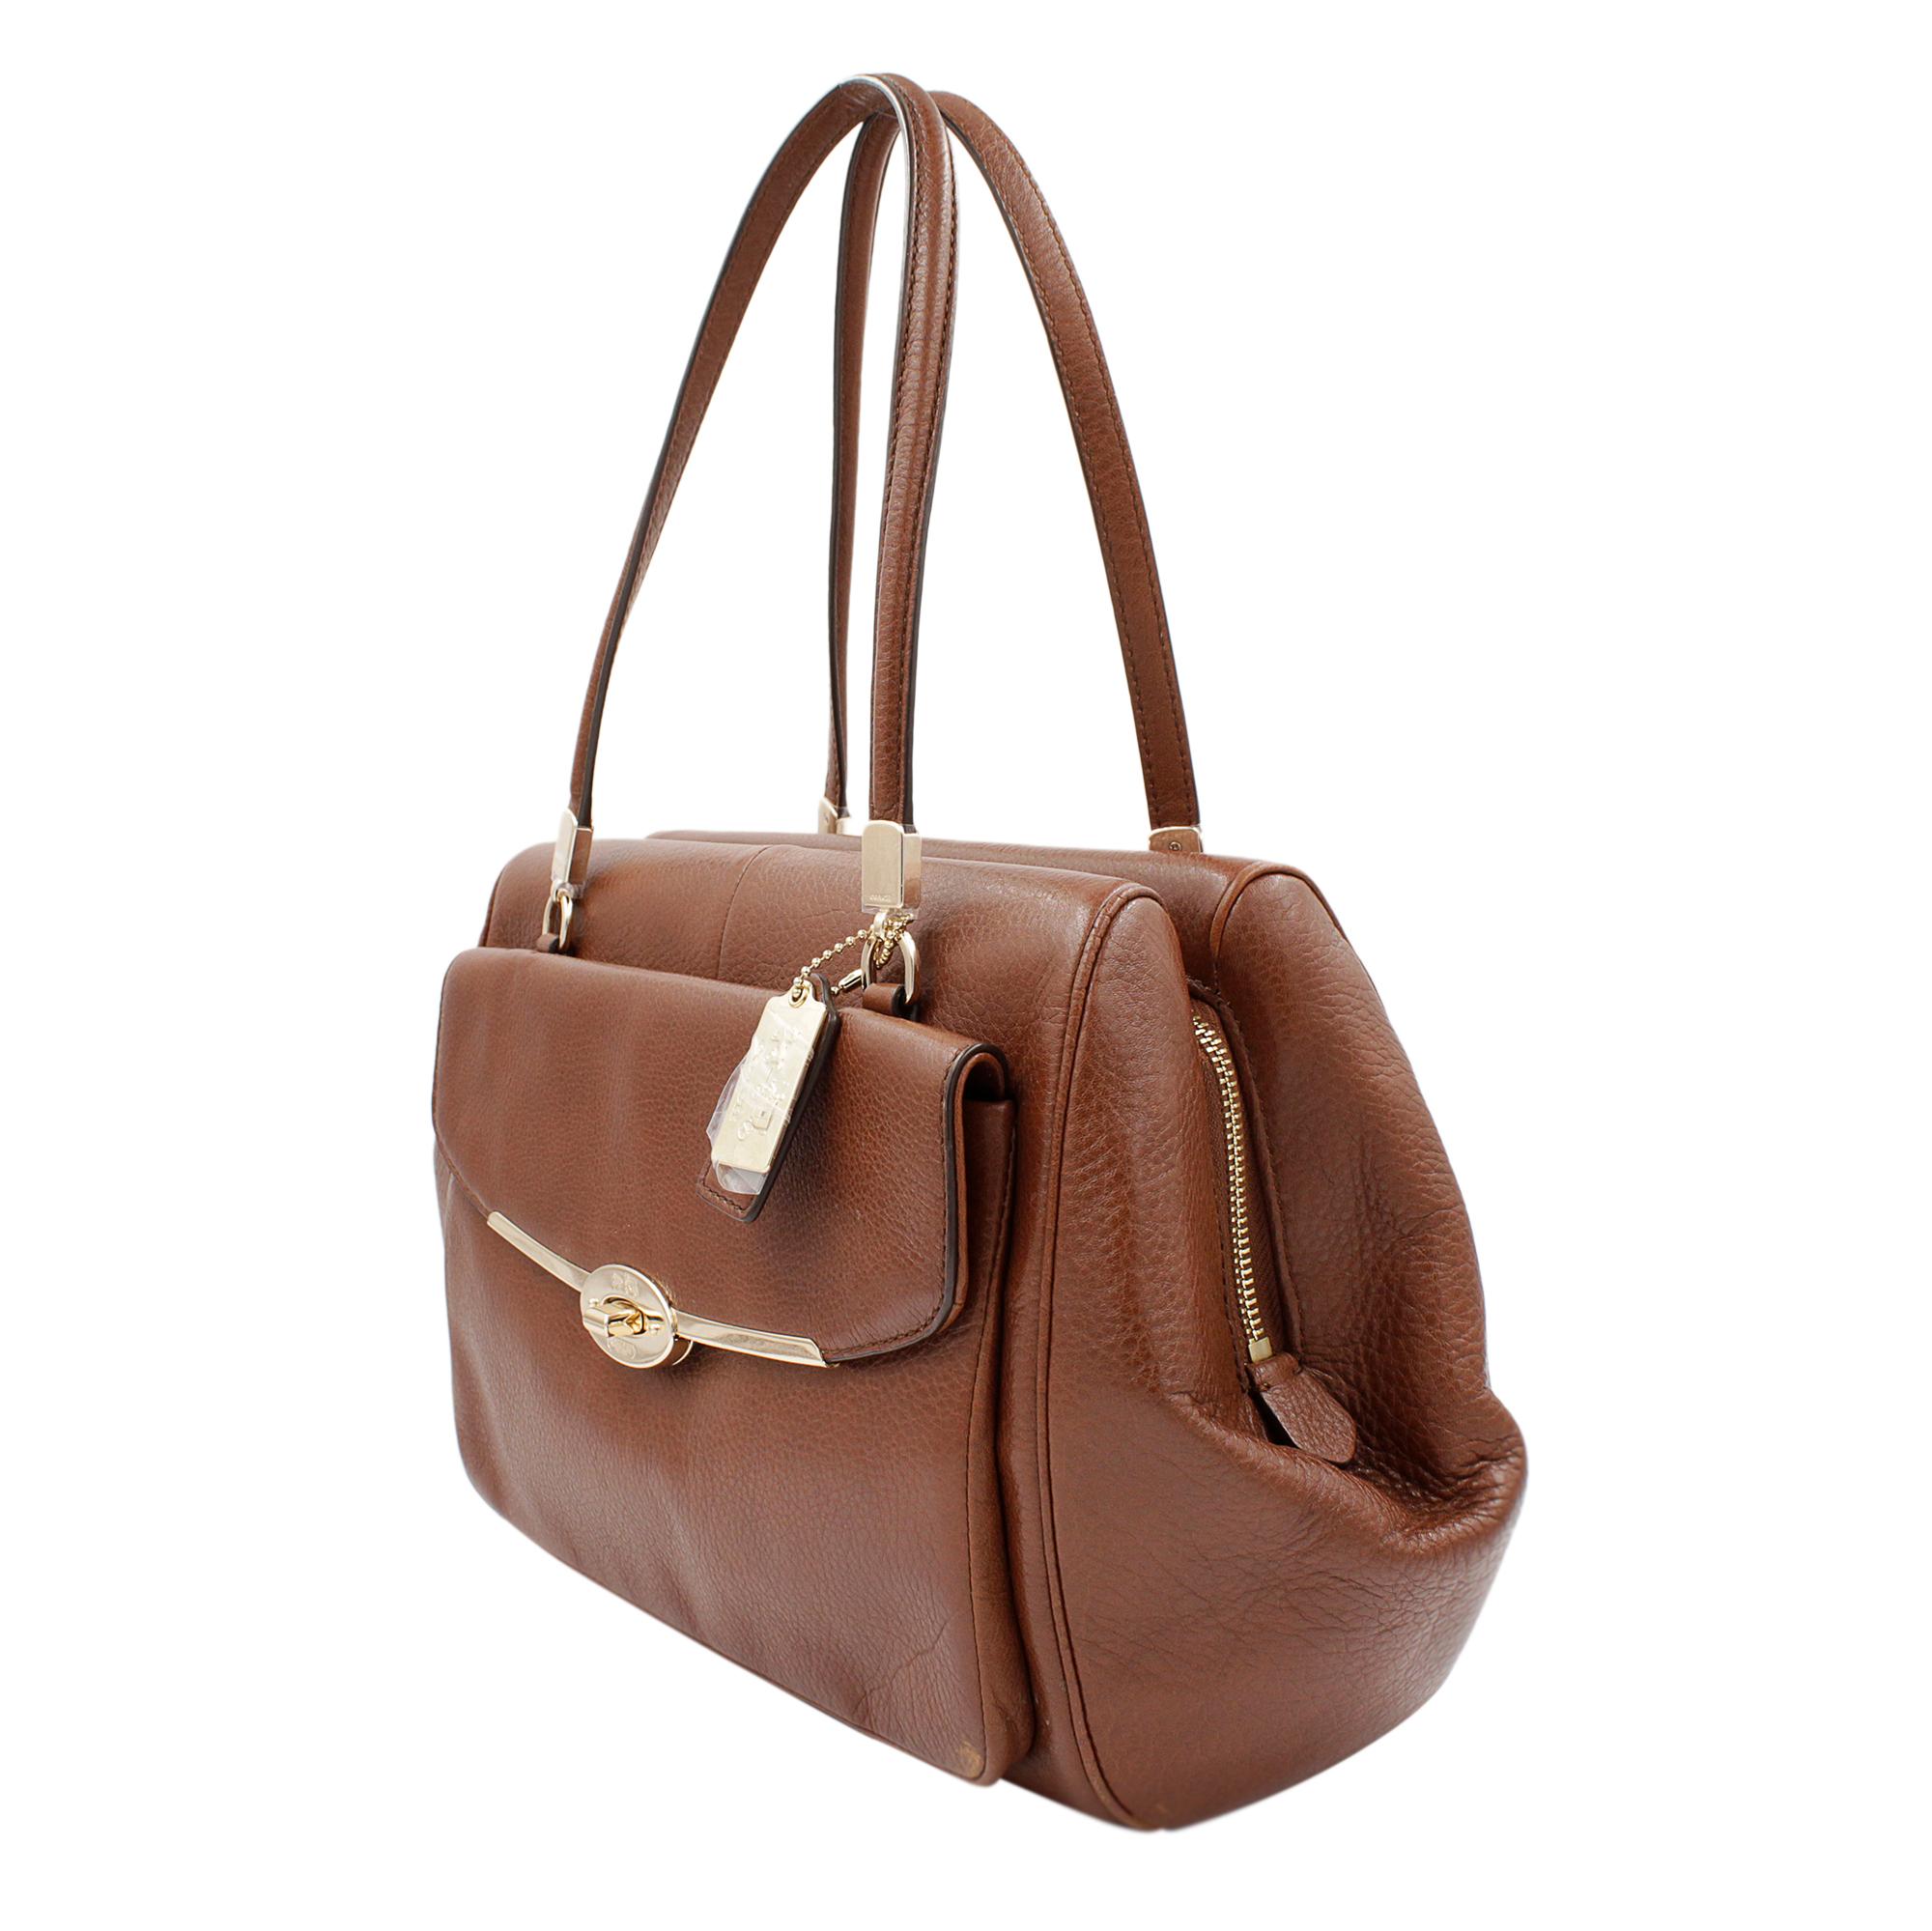 This Coach Madison Madeline 25166 Brown Leather Ladies Satchel is new with defects. It comes with no papers. It has additional 13.5 Inch long strap for cross body and shoulder wear, zip pocket, cell phone pocket and multifunction pockets inside, a